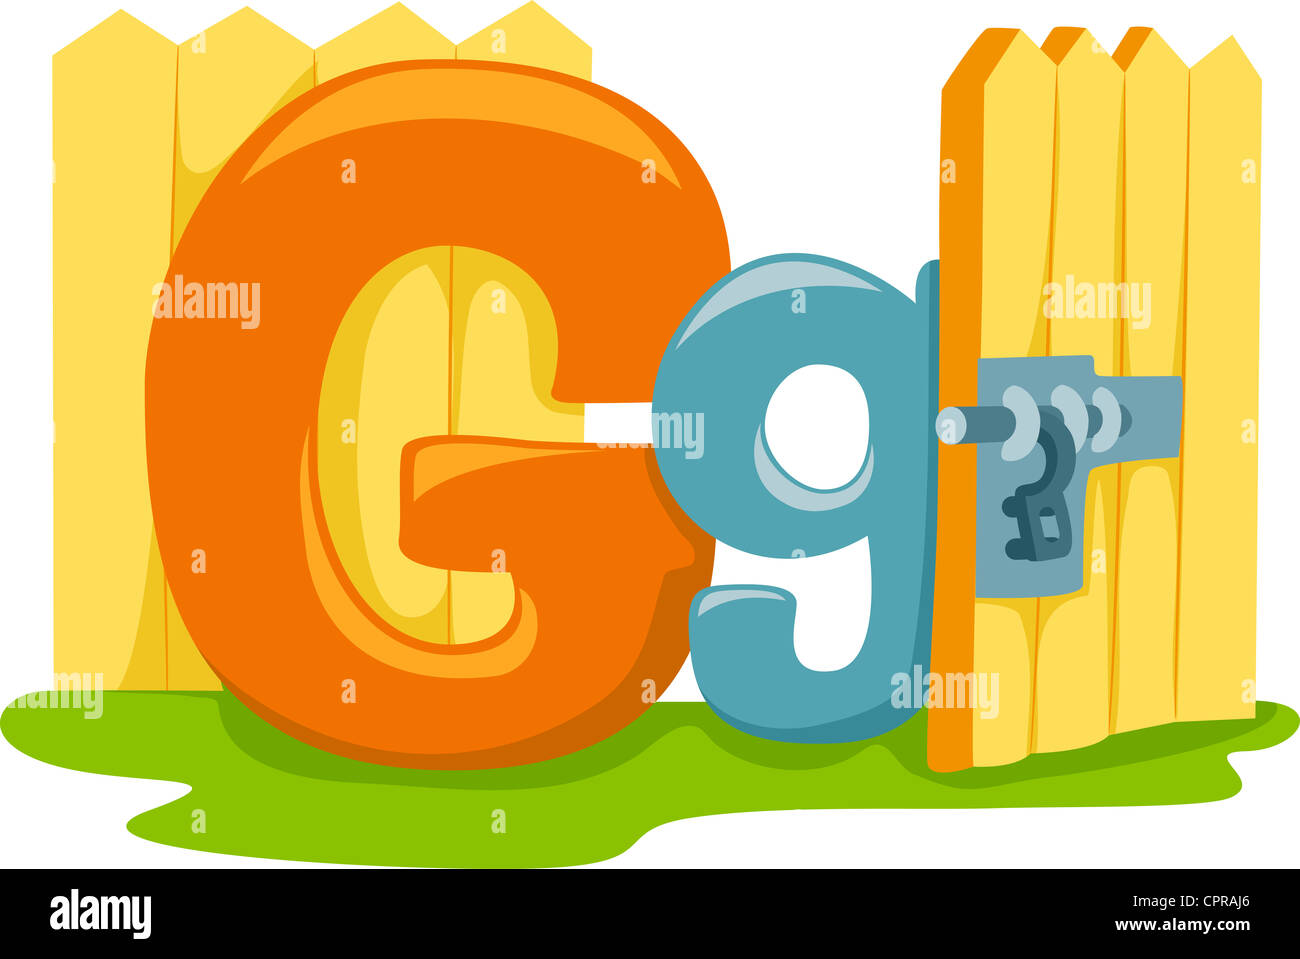 Illustration Featuring the Letter G Stock Photo